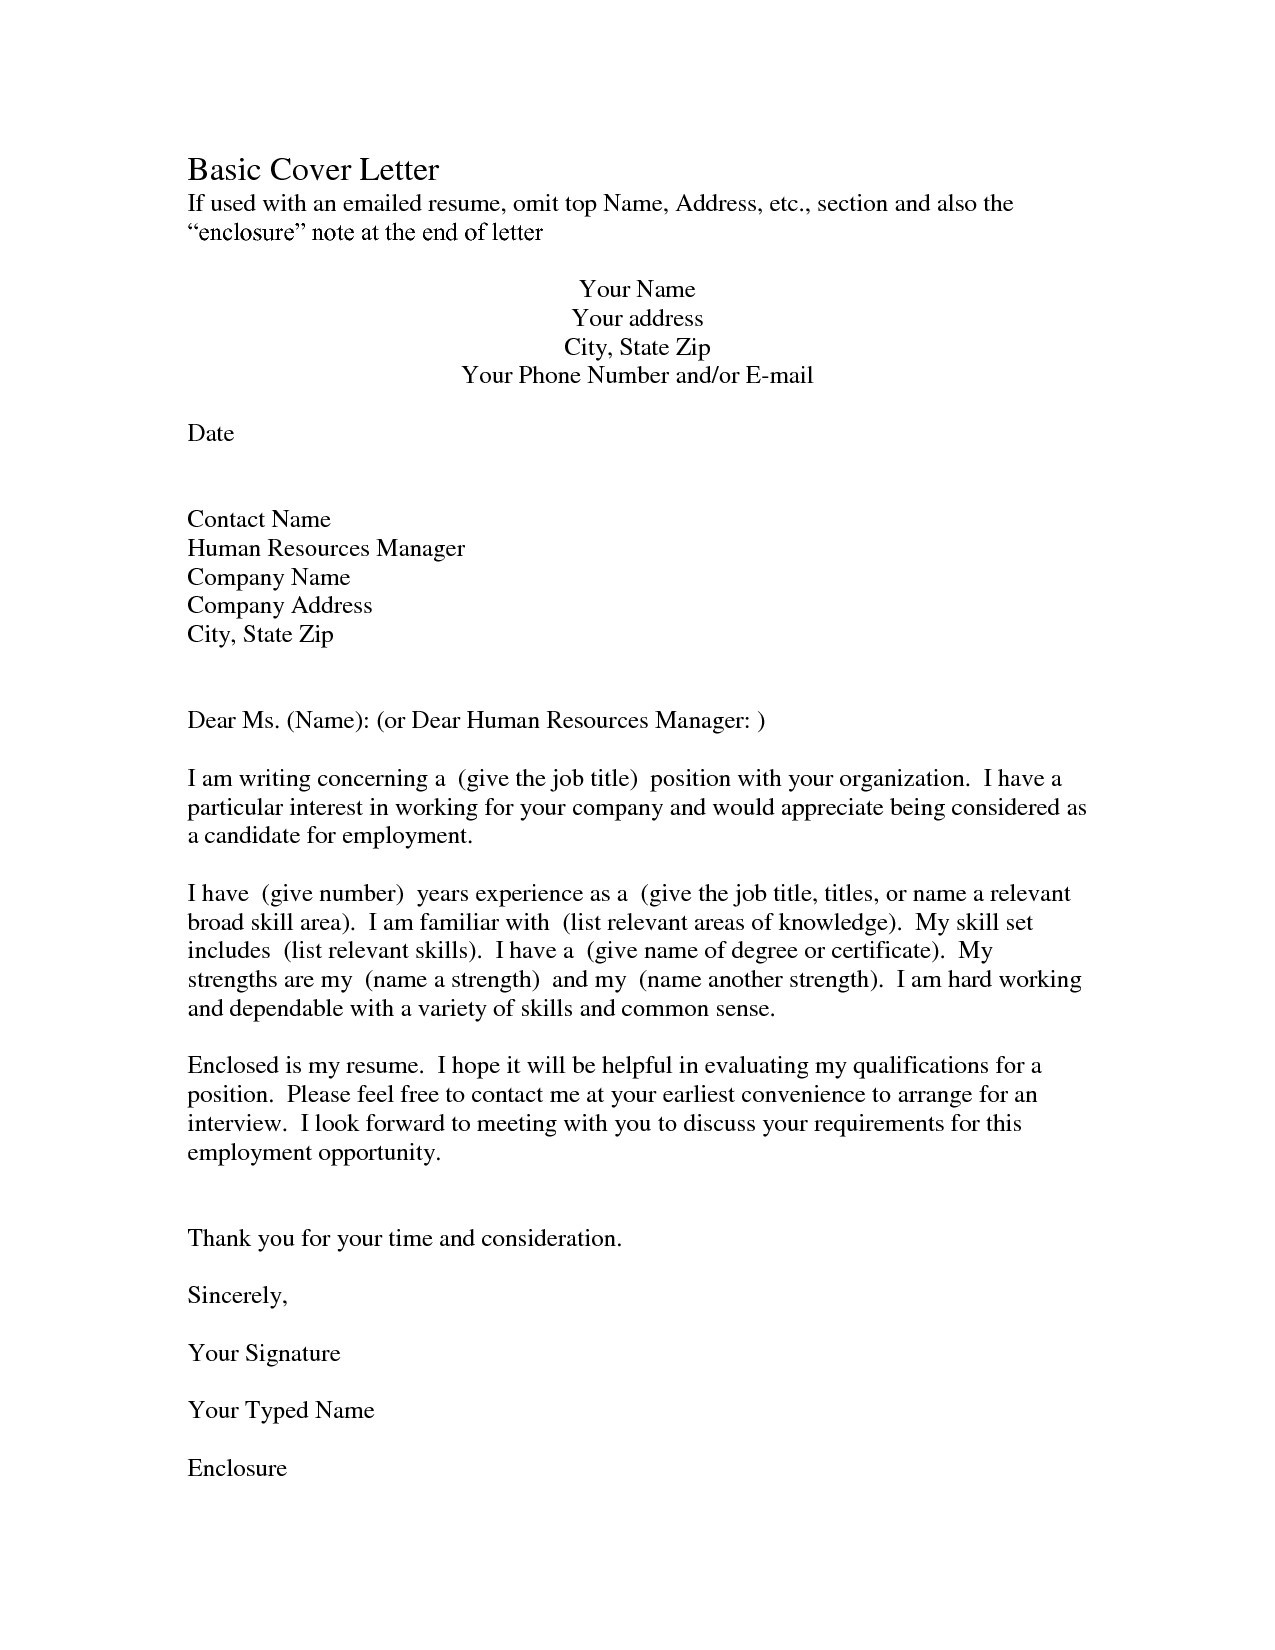 Free Cover Letter Template for Job Application - Free Resume Cover Letter format S